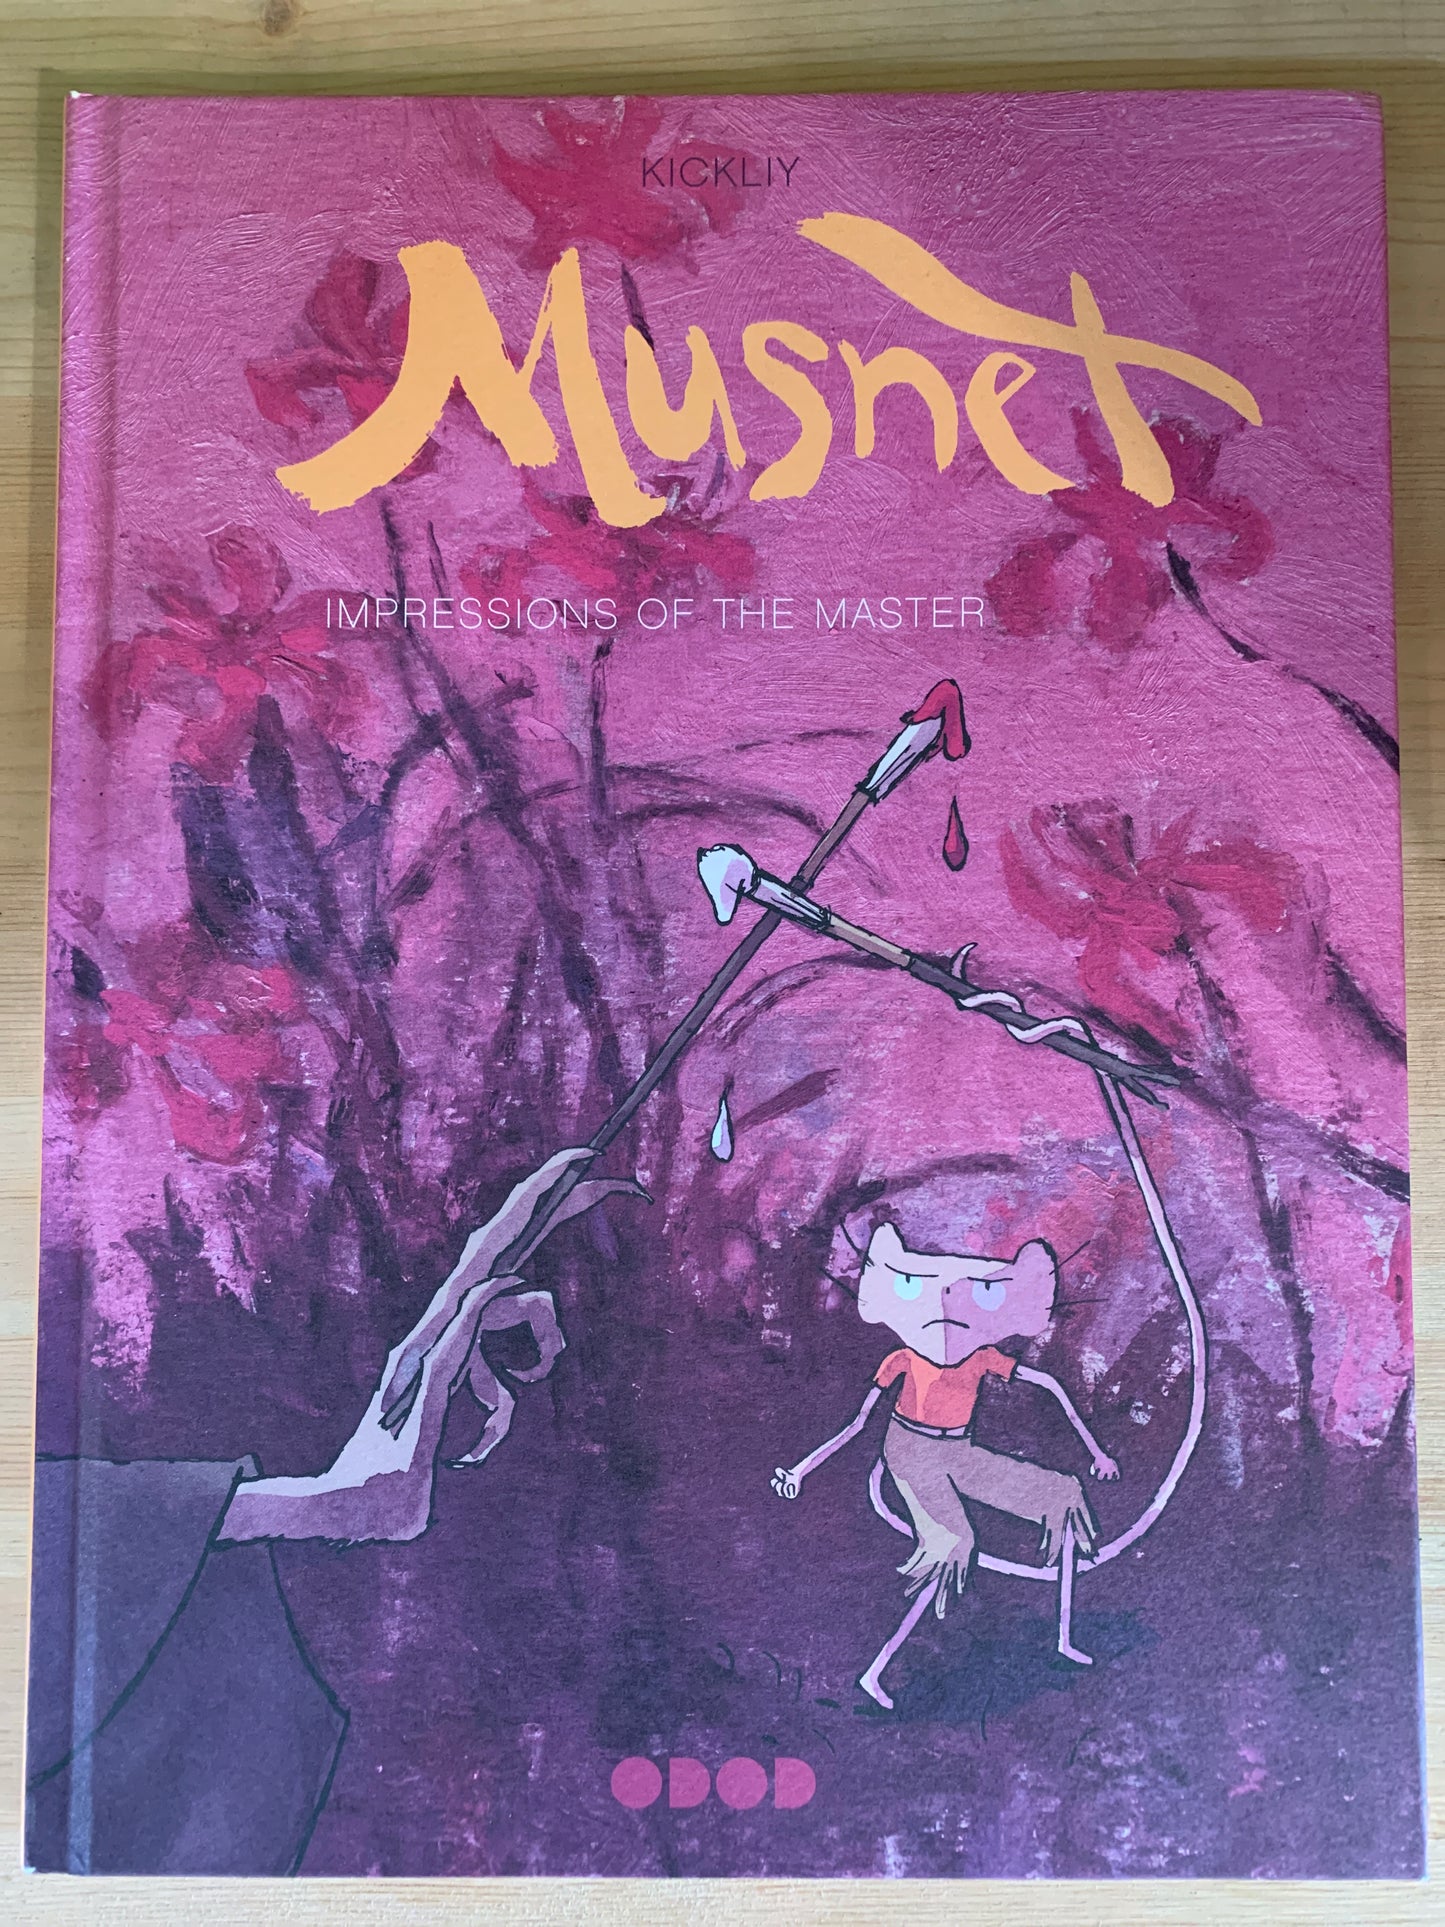 Musnet: Impressions of the Master